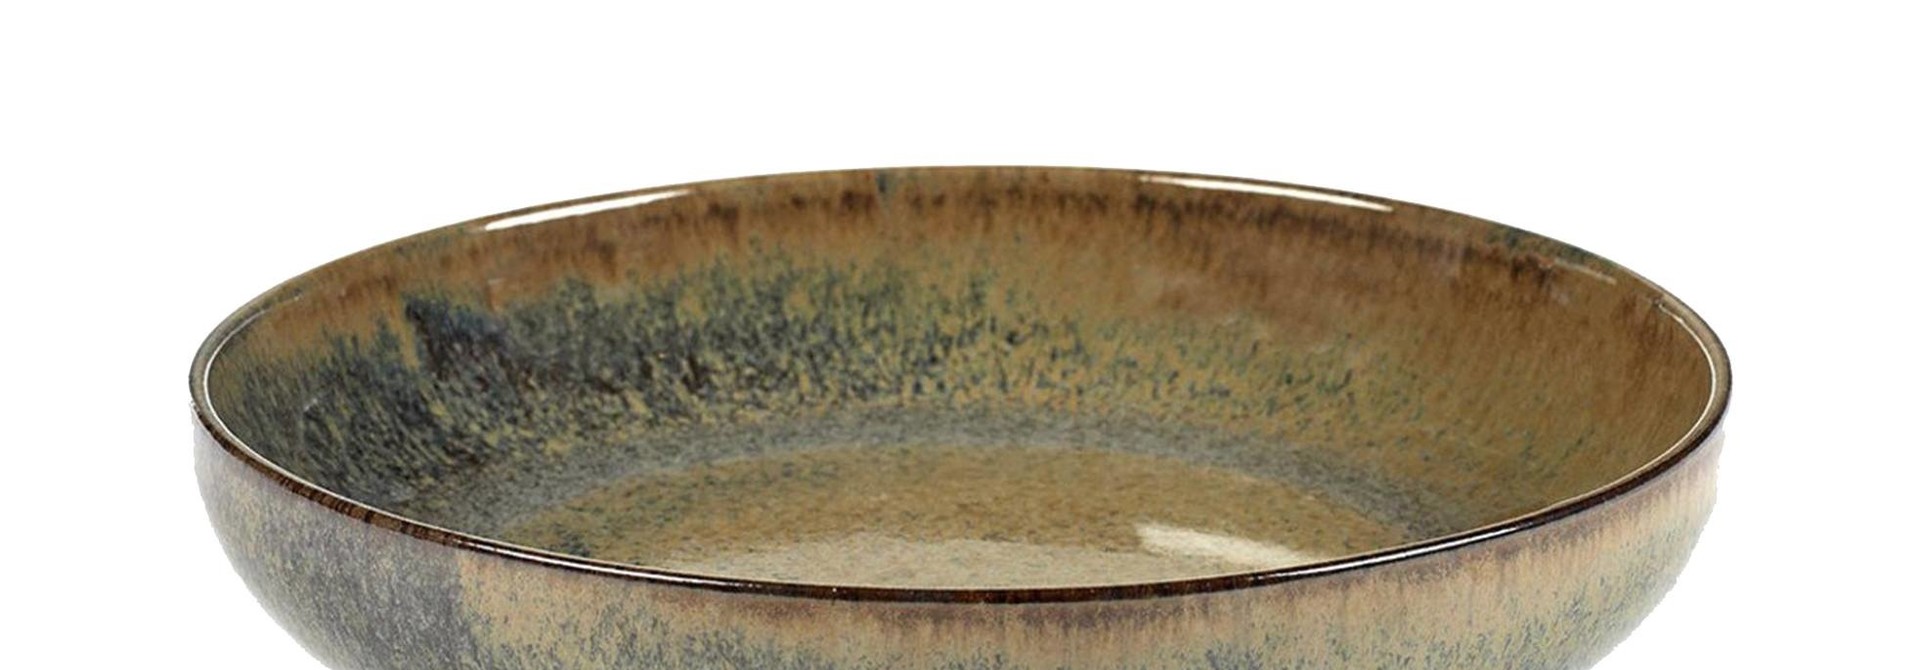 Surface deep plate of earthenware 21 cm